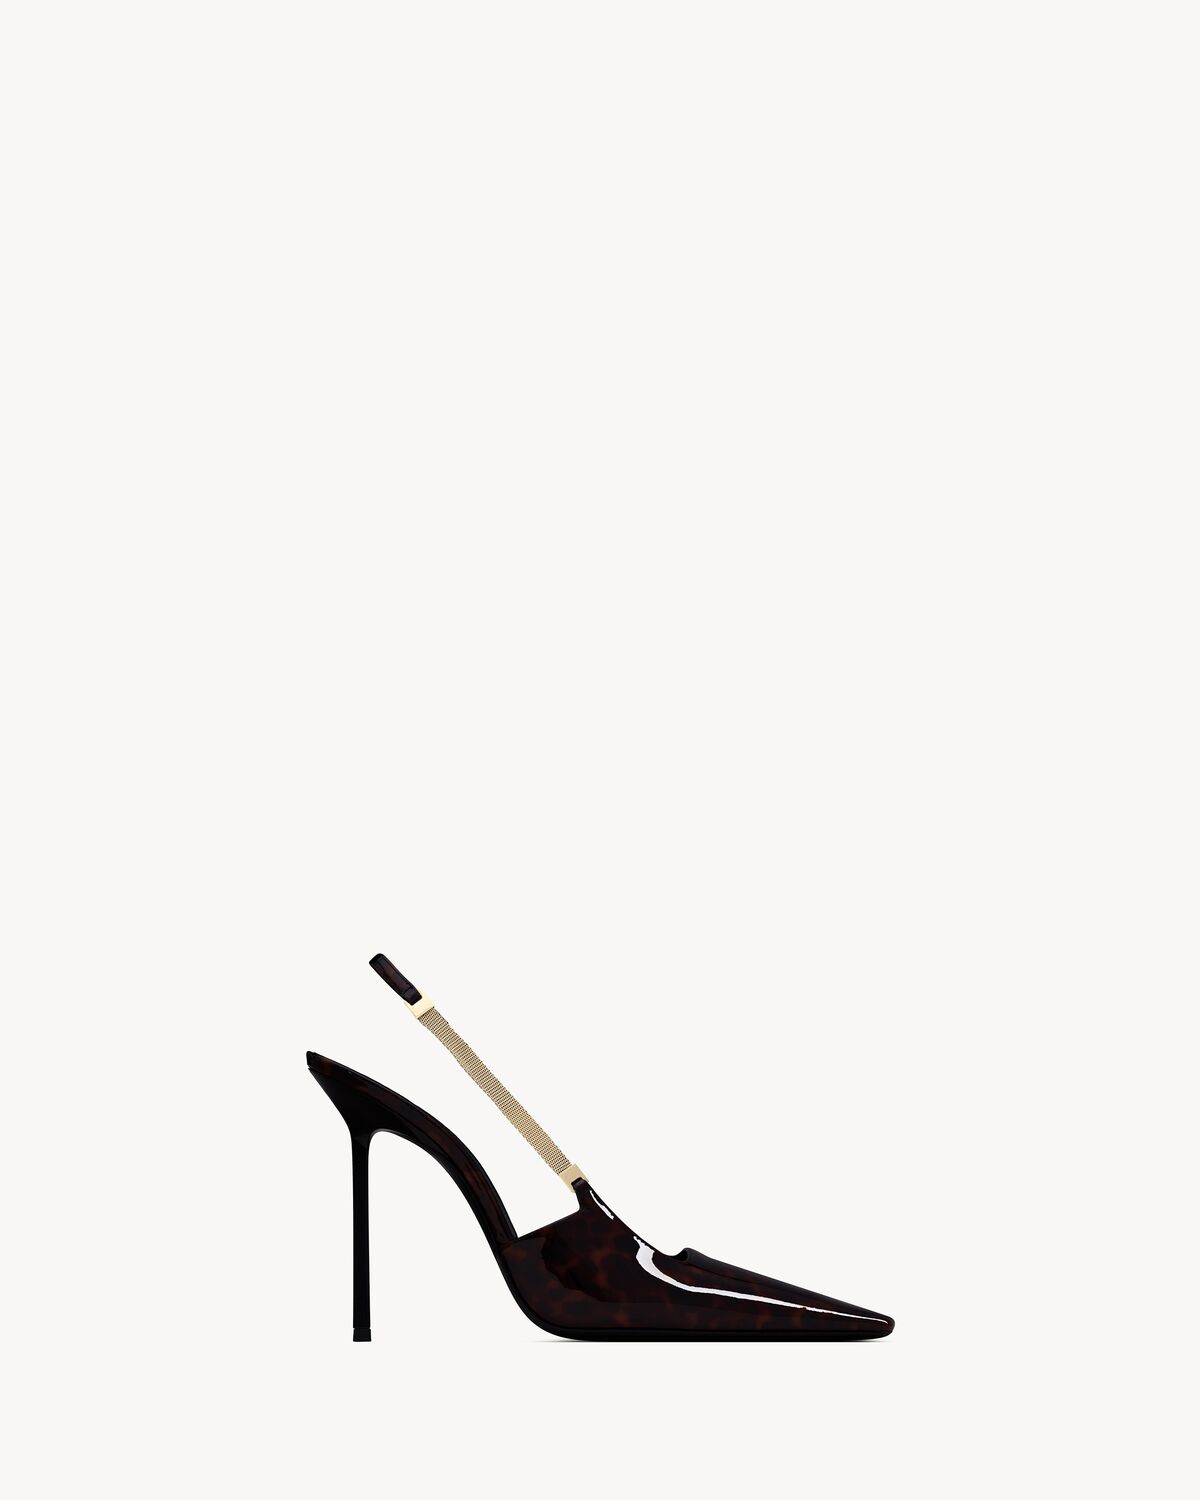 BLAKE slingback pumps in in tortoiseshell patent leather